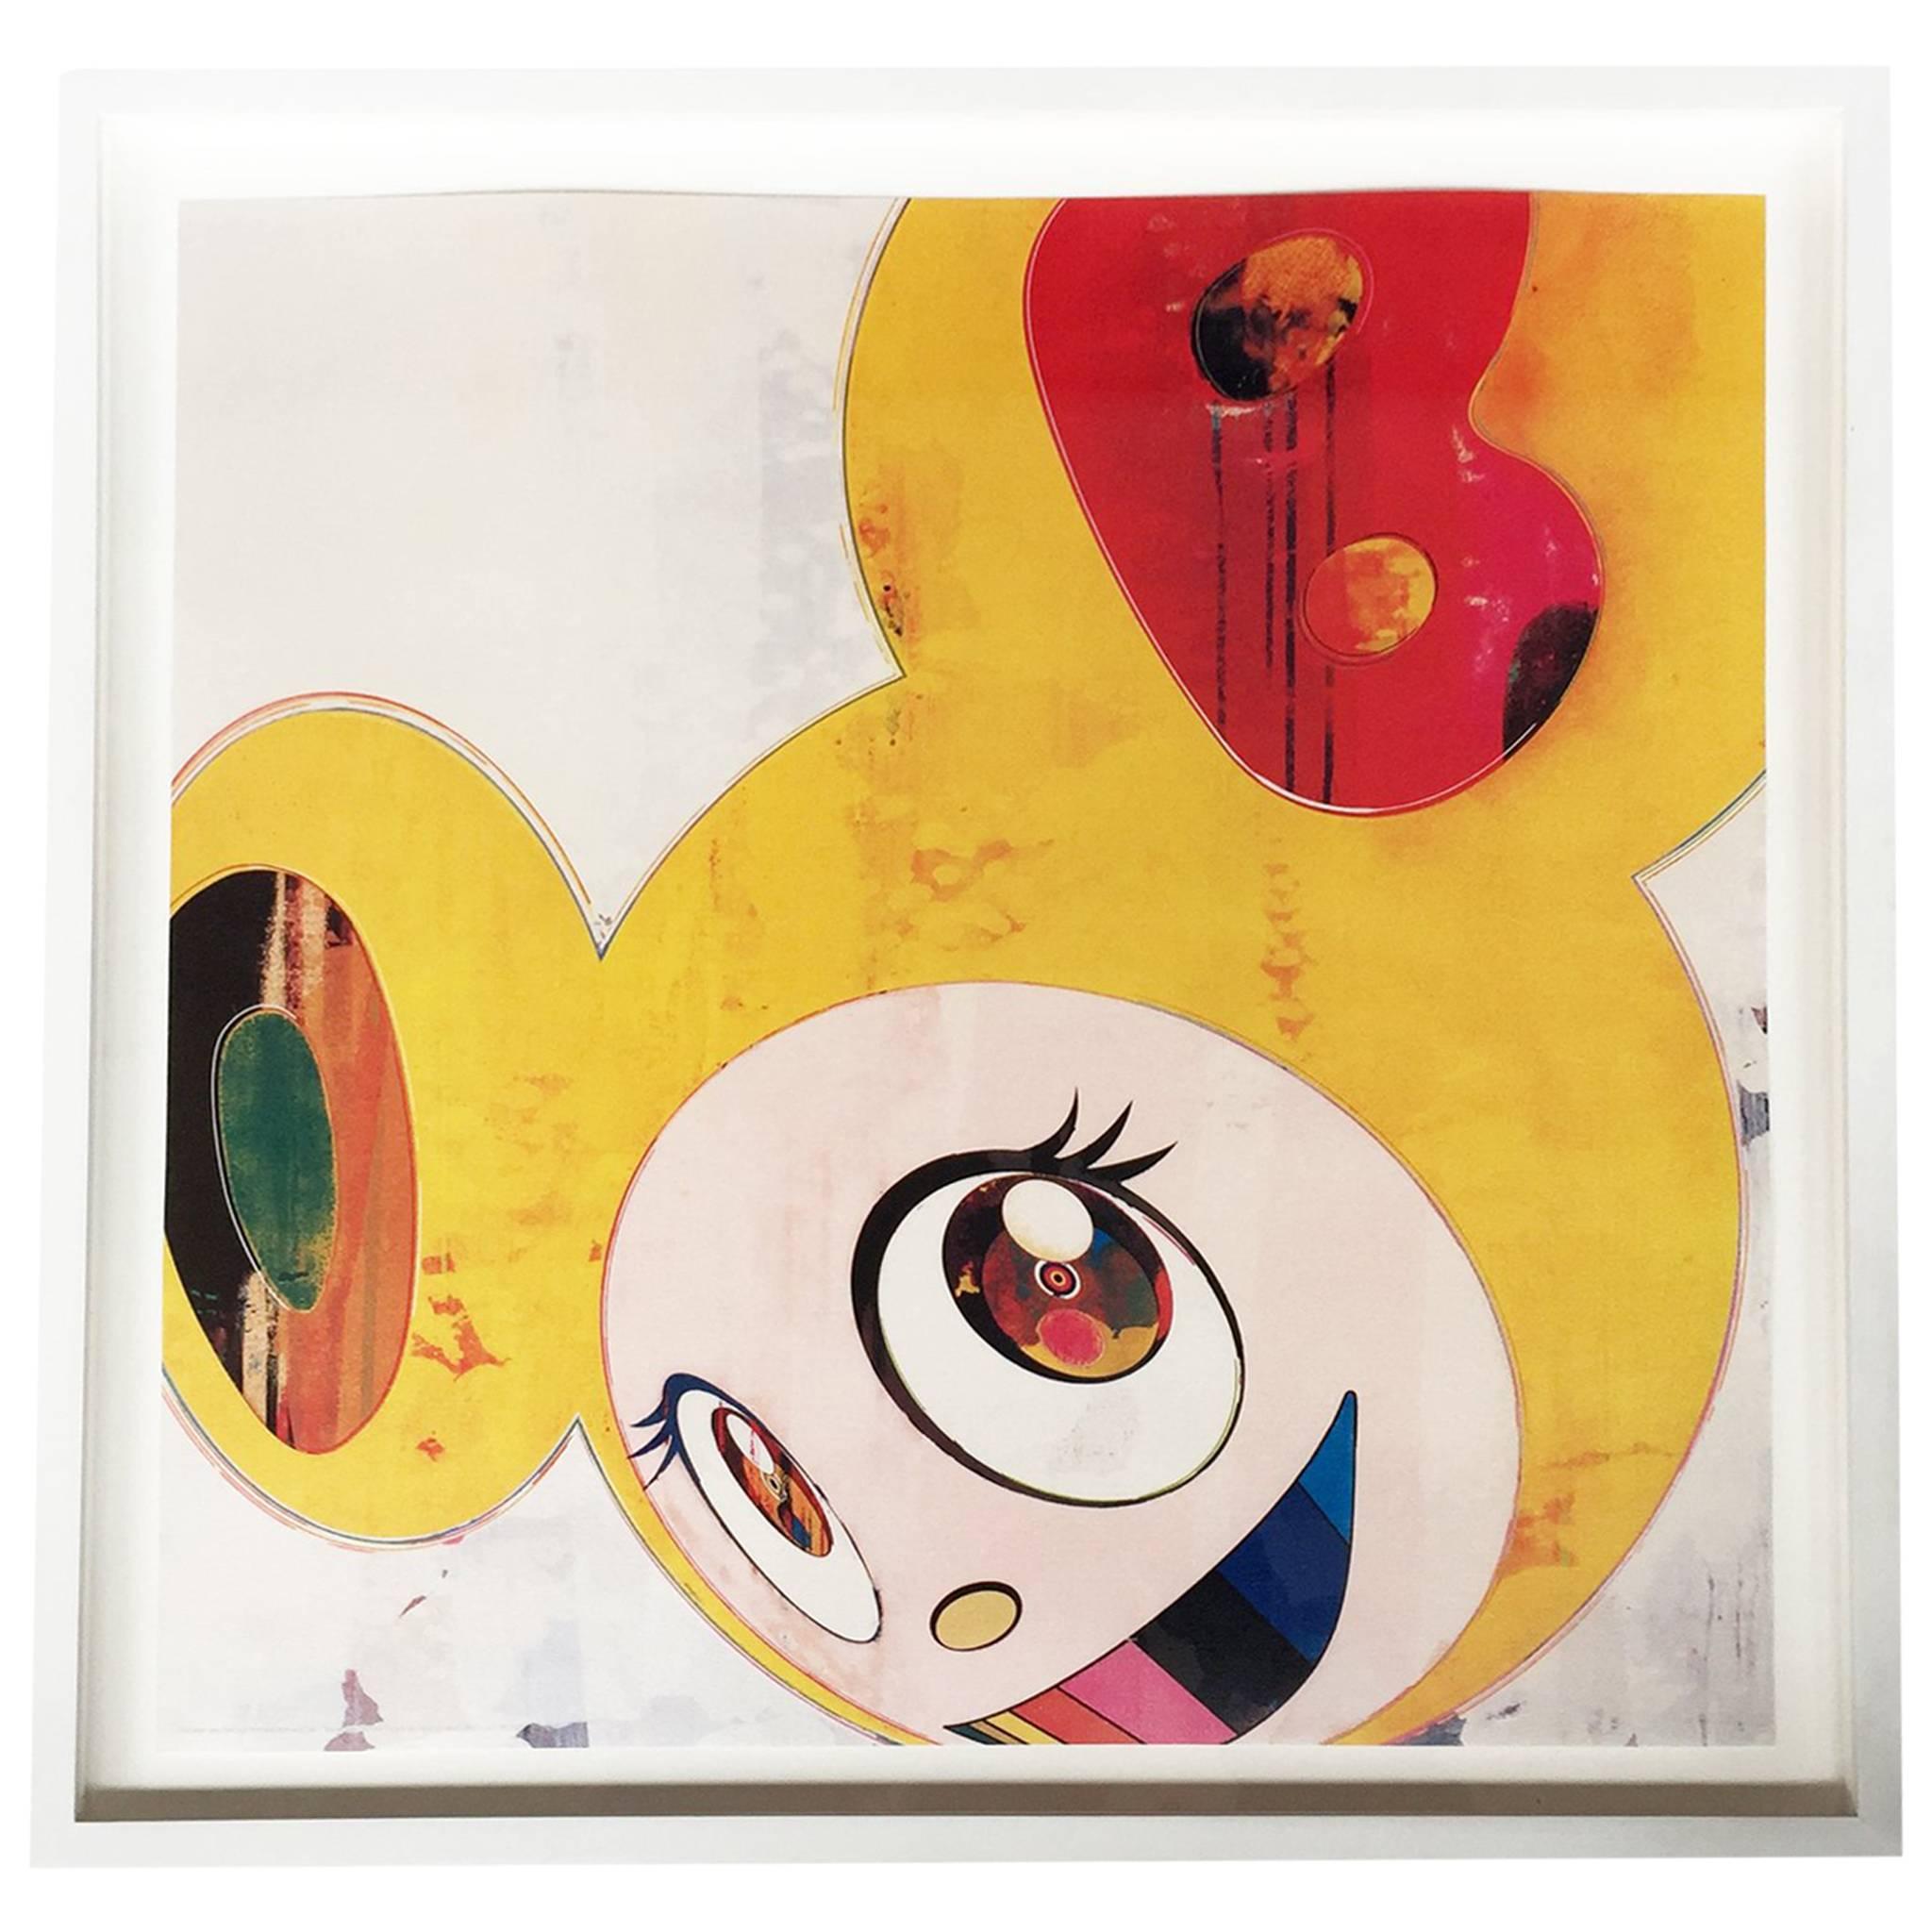 Takashi Murakami Offset Lithograph, "And Then...Yellow Jelly"